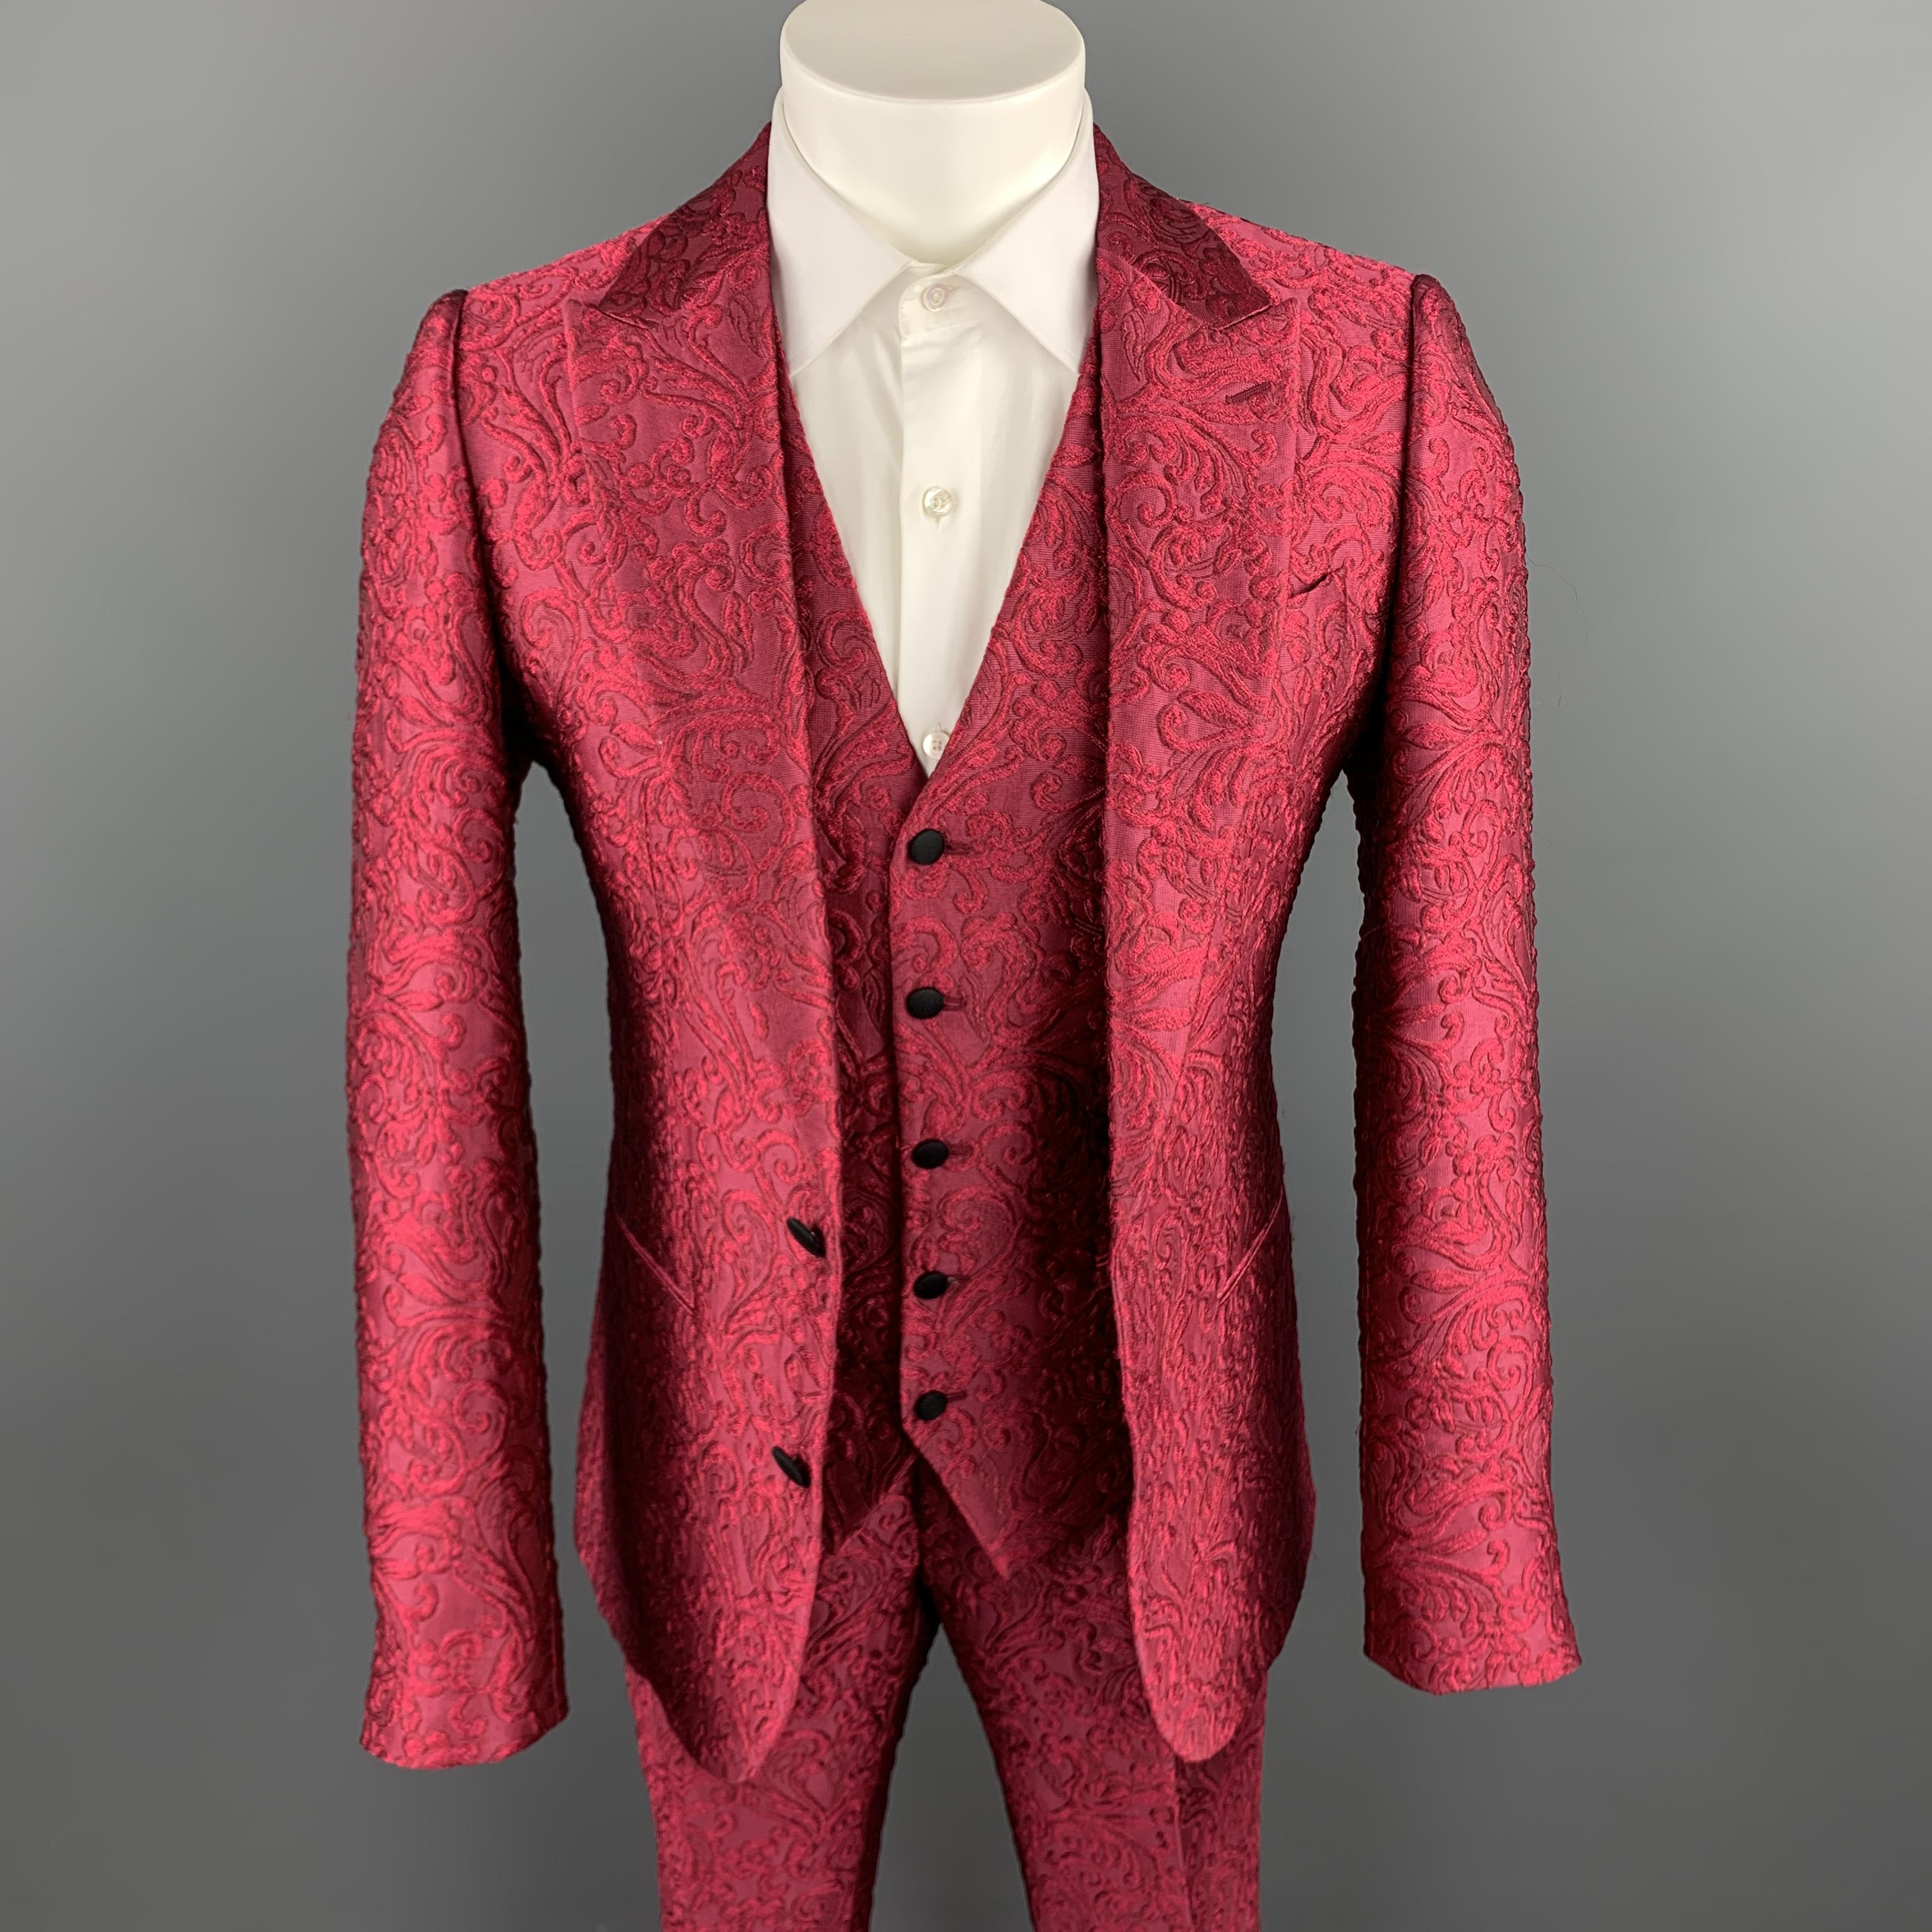 DOLCE & GABBANA suit comes in a vibrant raspberry fuchsia pink brocade and includes a single breasted, two button, peak lapel sport coat, matching V neck vest, and tailored dress pants. Made in Italy.

New with Tags.
Marked: IT